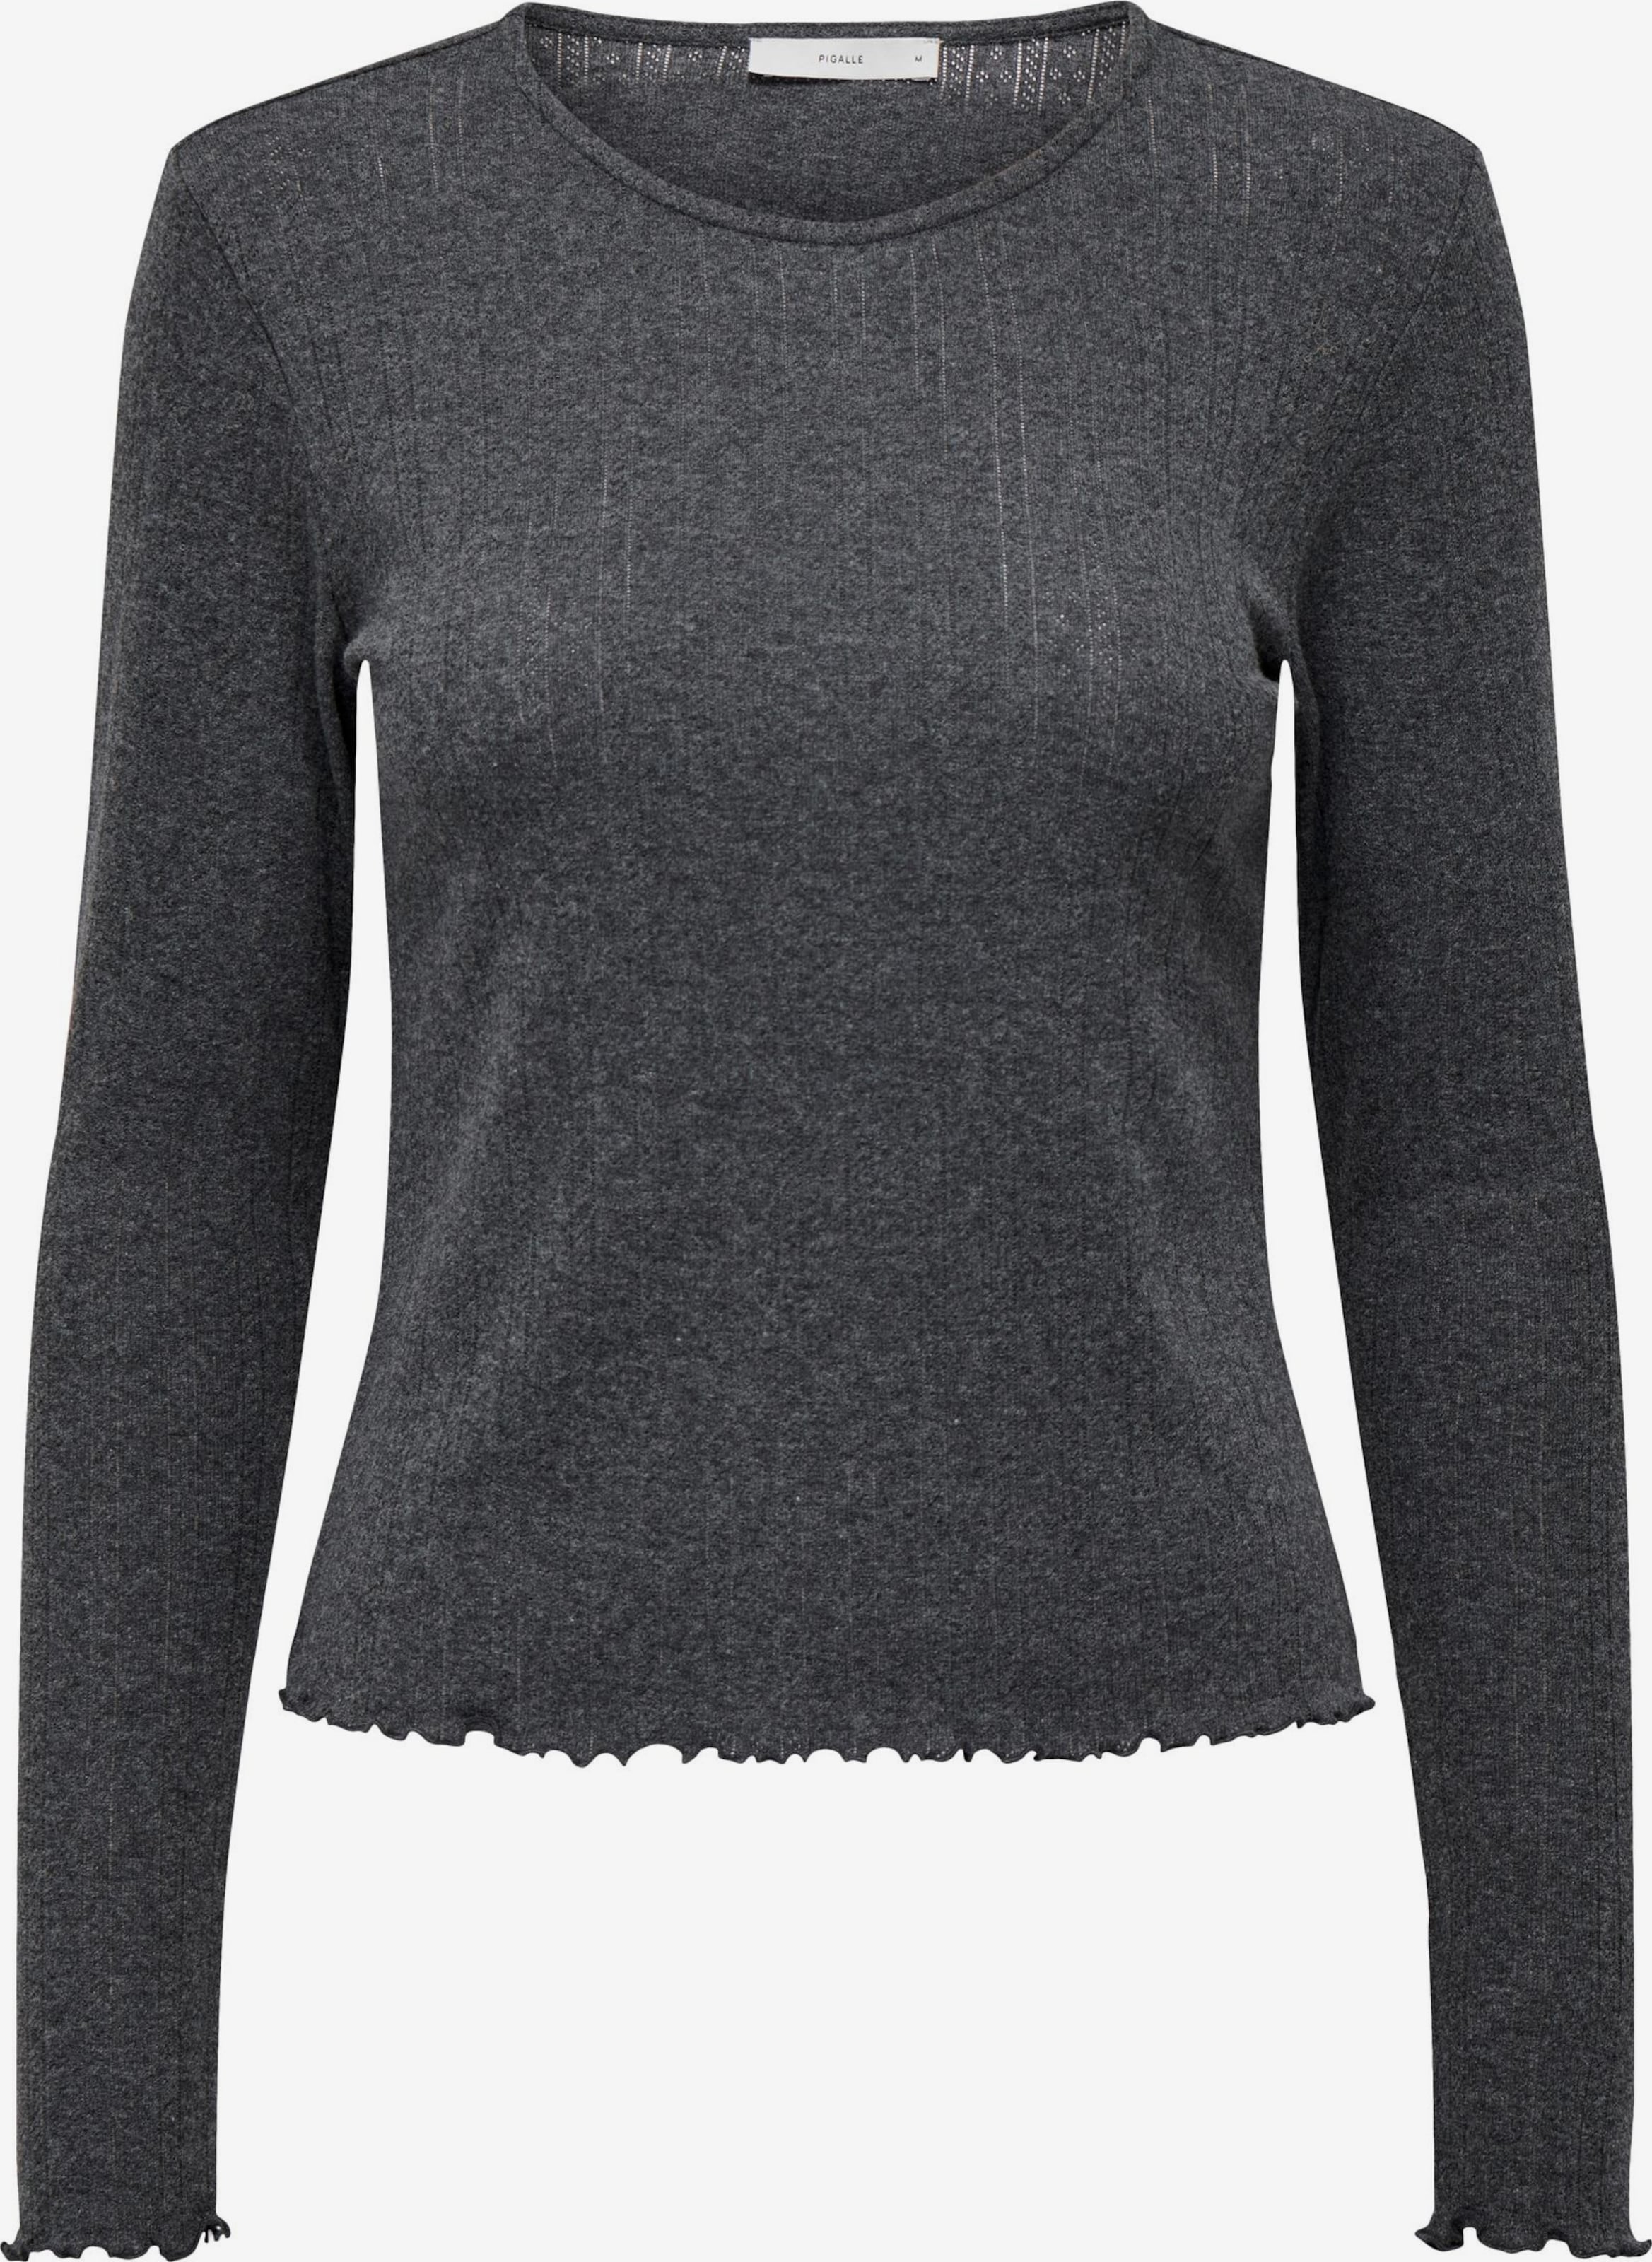 ONLY ABOUT Dark \'CARLOTTA\' | YOU Grey in Shirt